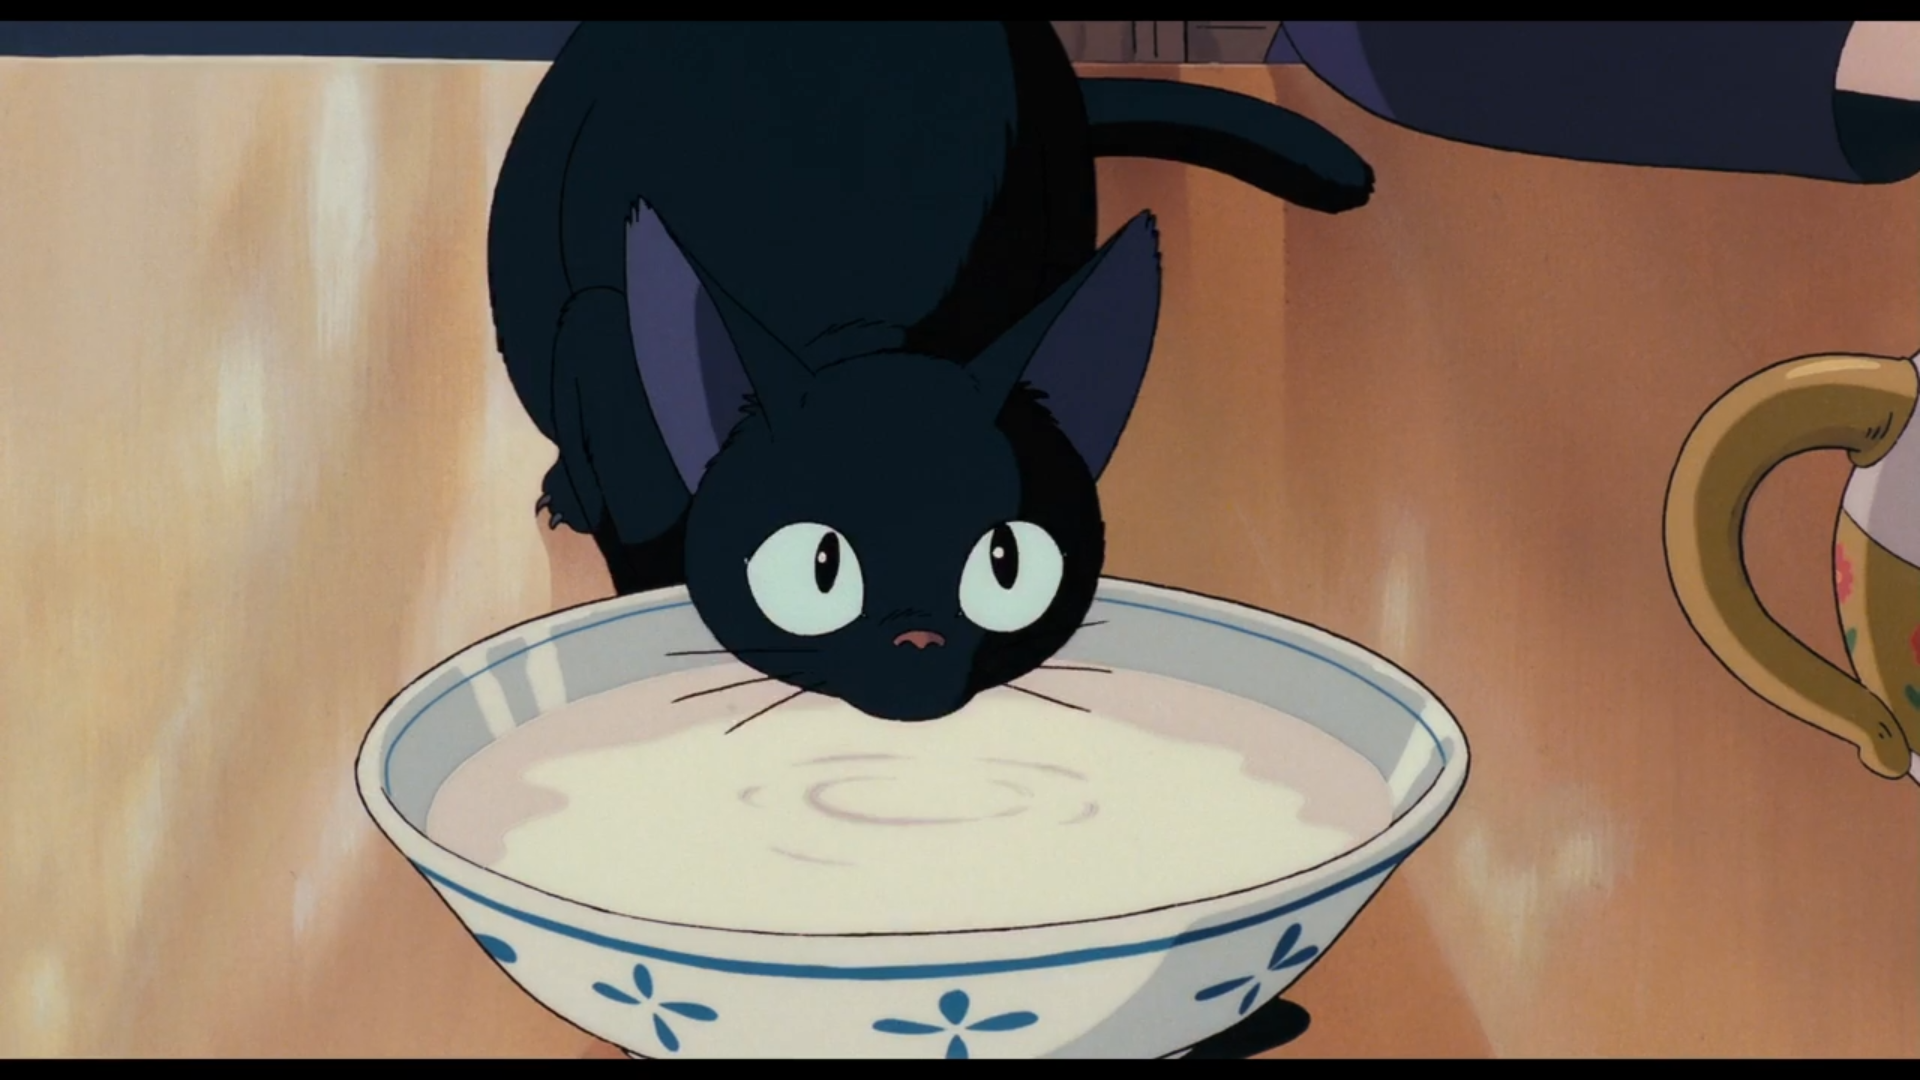 Jiji drinks from a bowl of milk in Kiki's Delivery Service